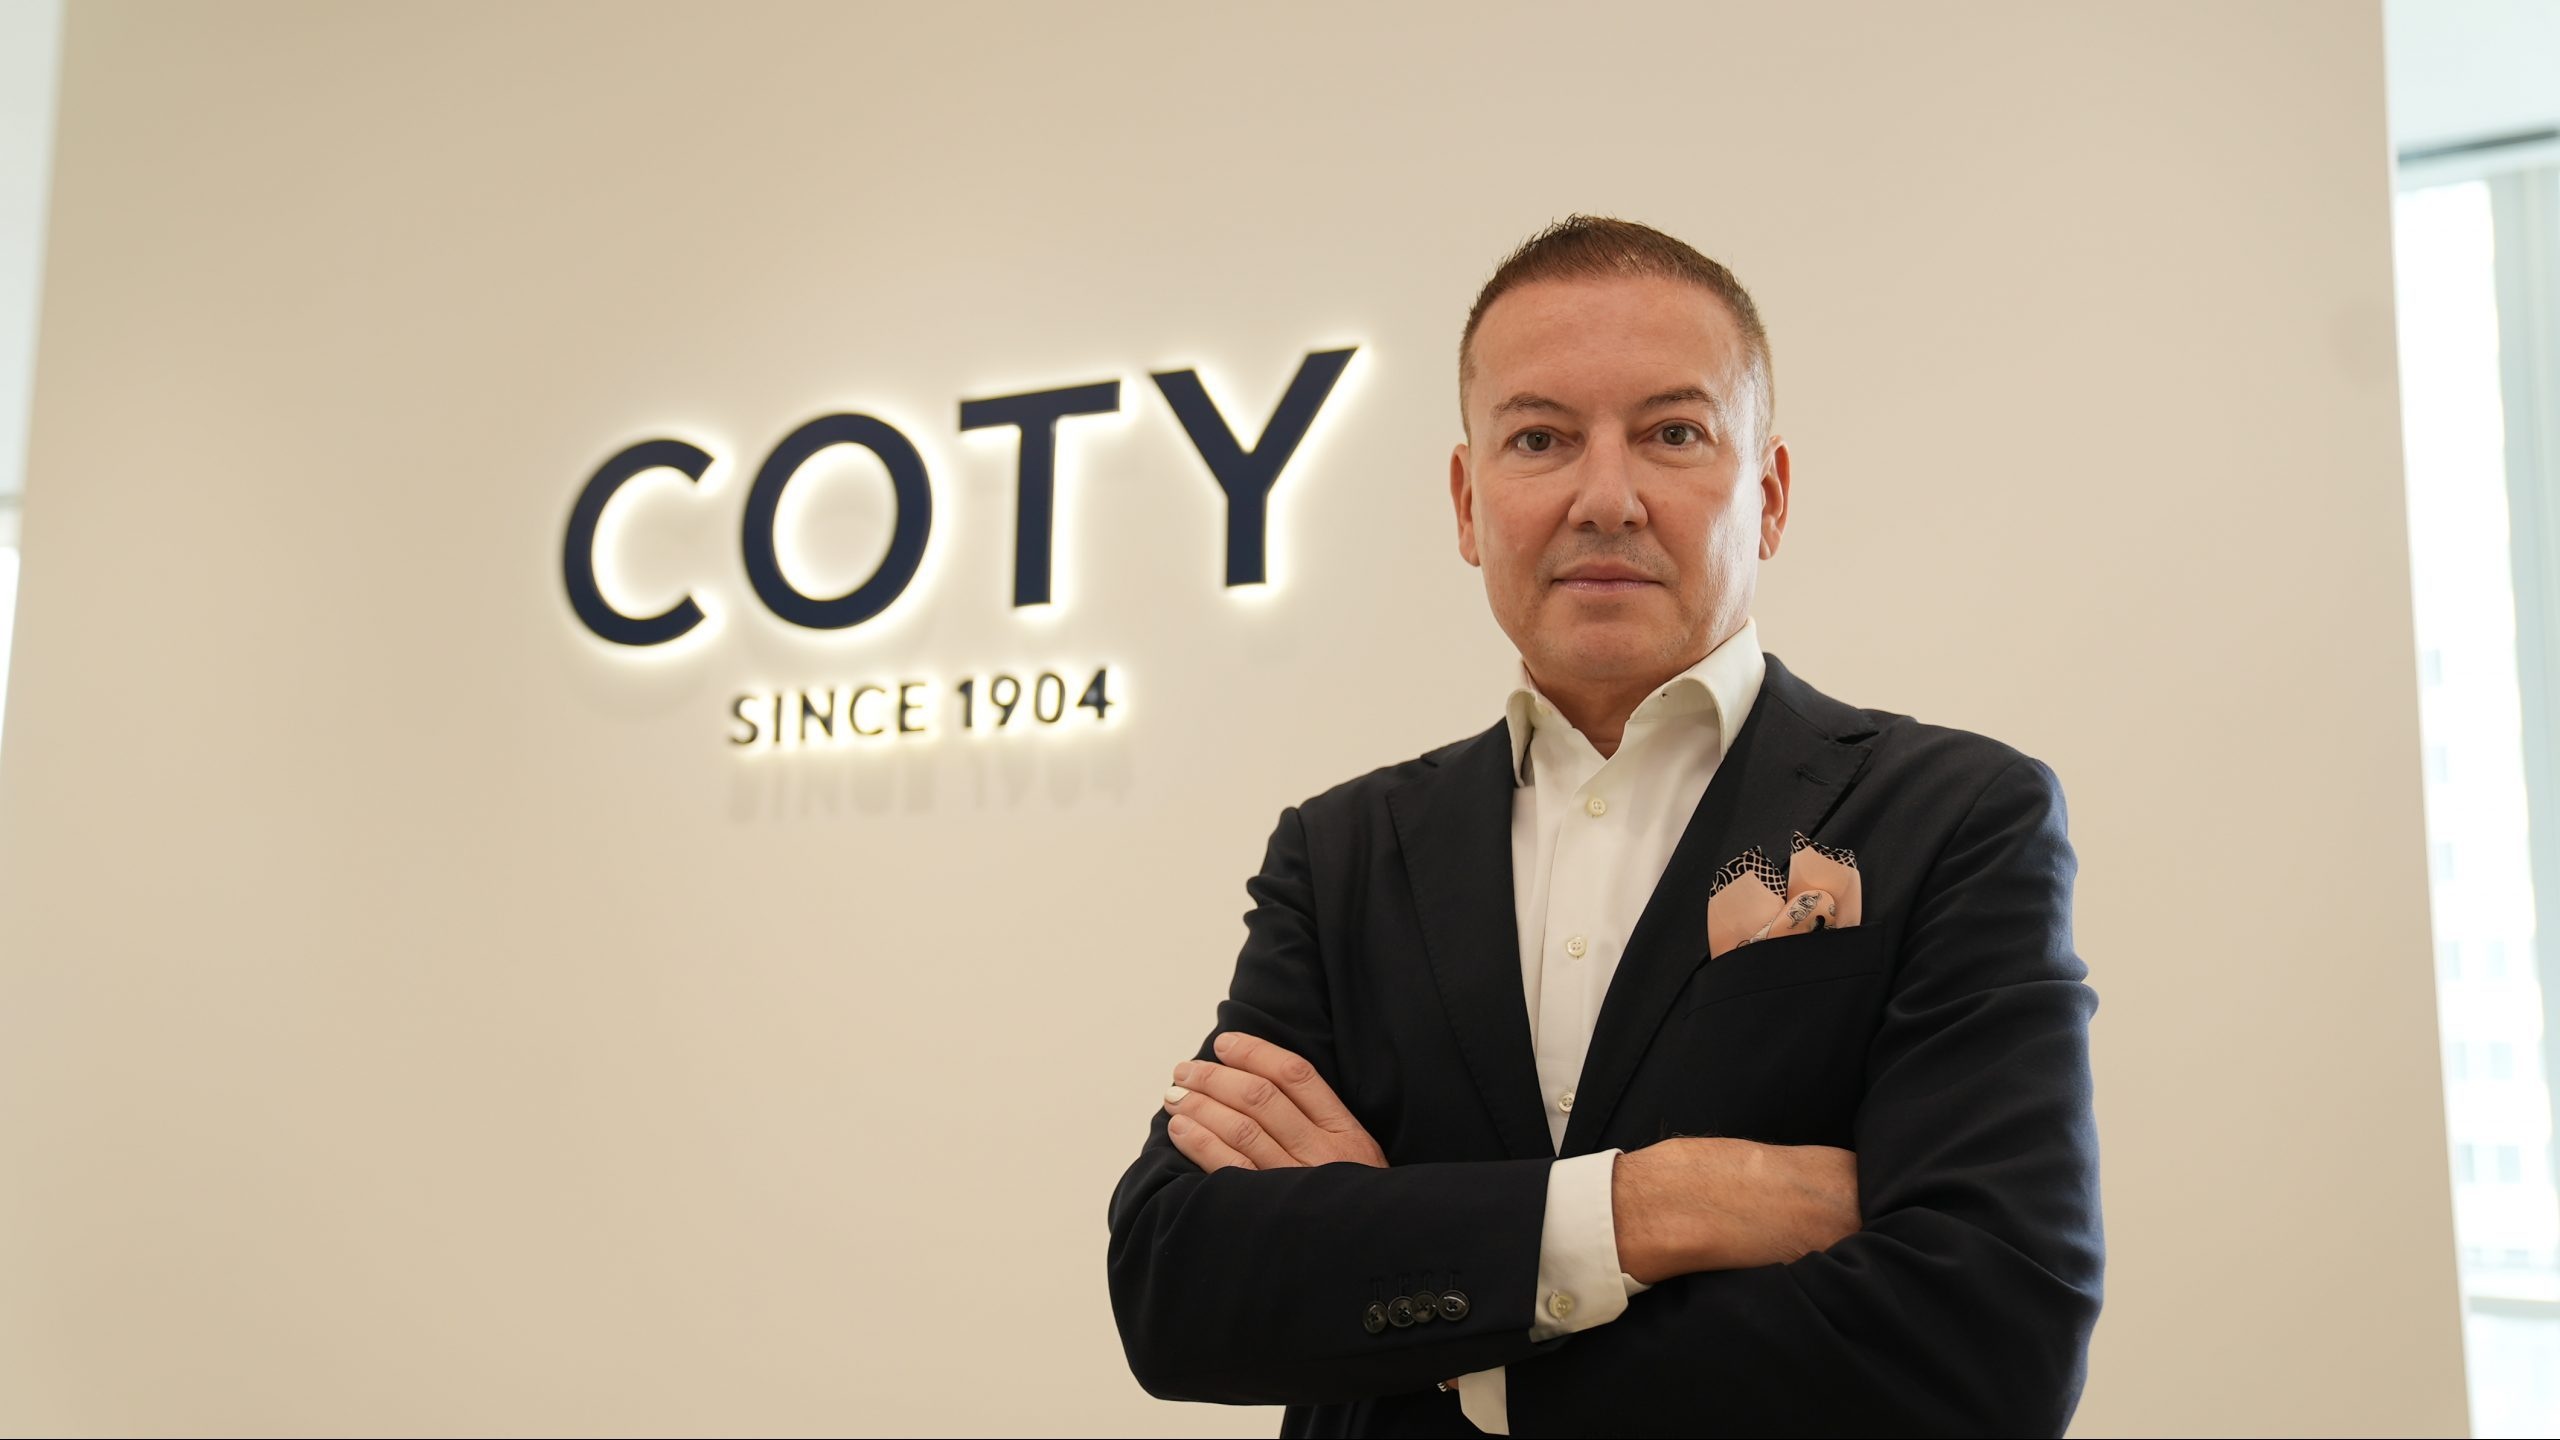 Coty Group has modified its development strategy and re-positioned its brands with the aim of expanding its business in China to generate 10 percent of global sales. Photo: Jing Daily